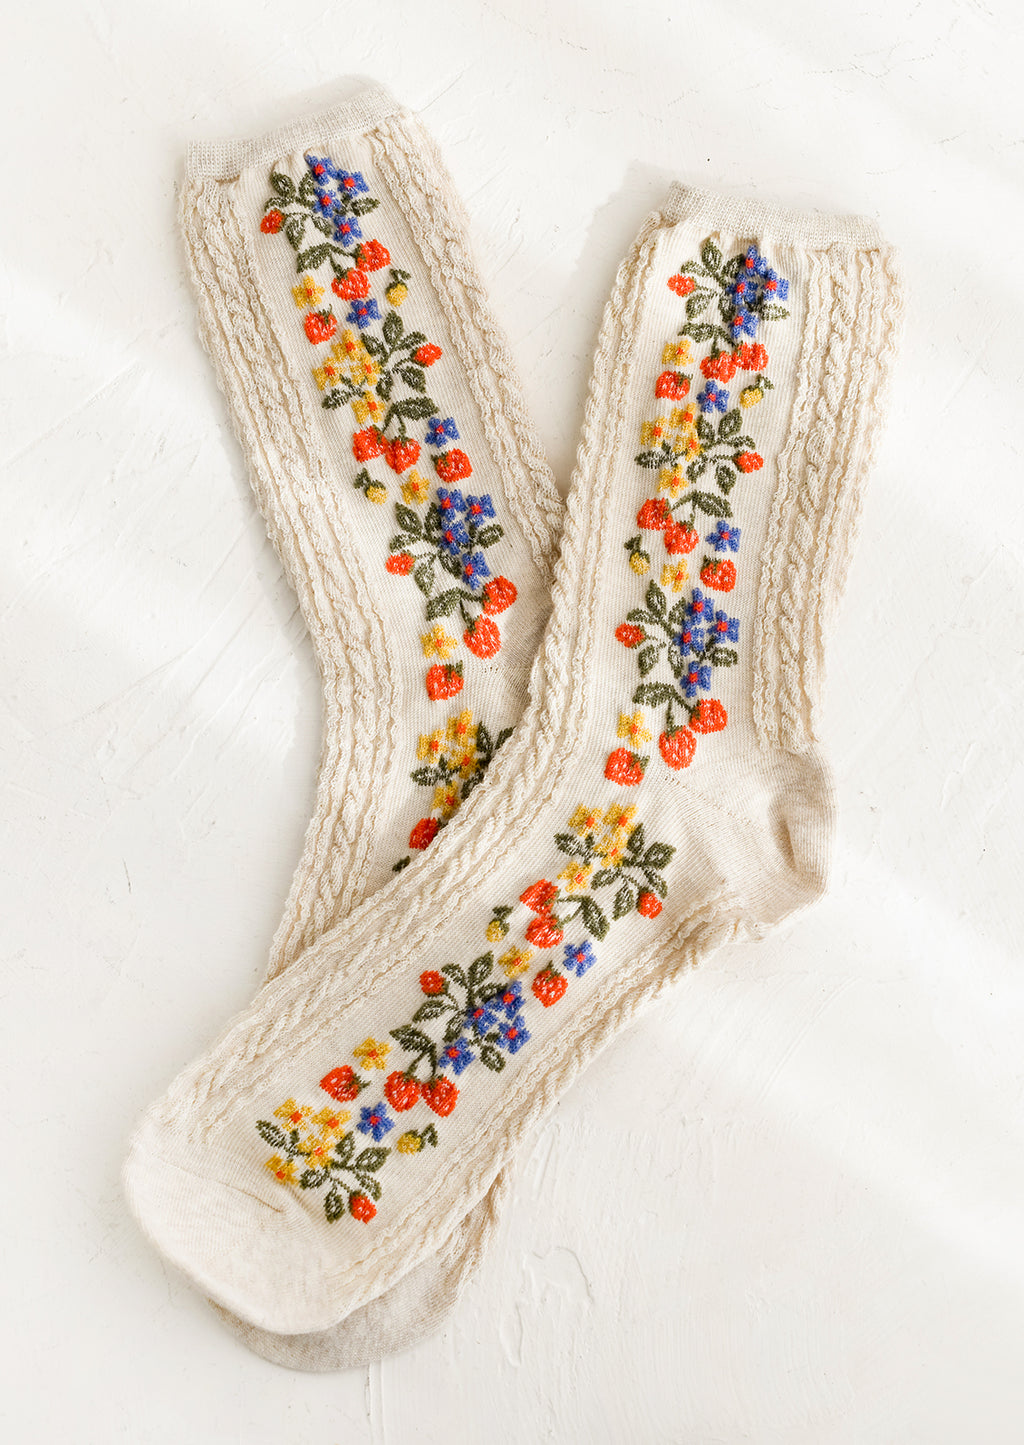 1: A pair of oatmeal colored socks with primary color strawberry print.